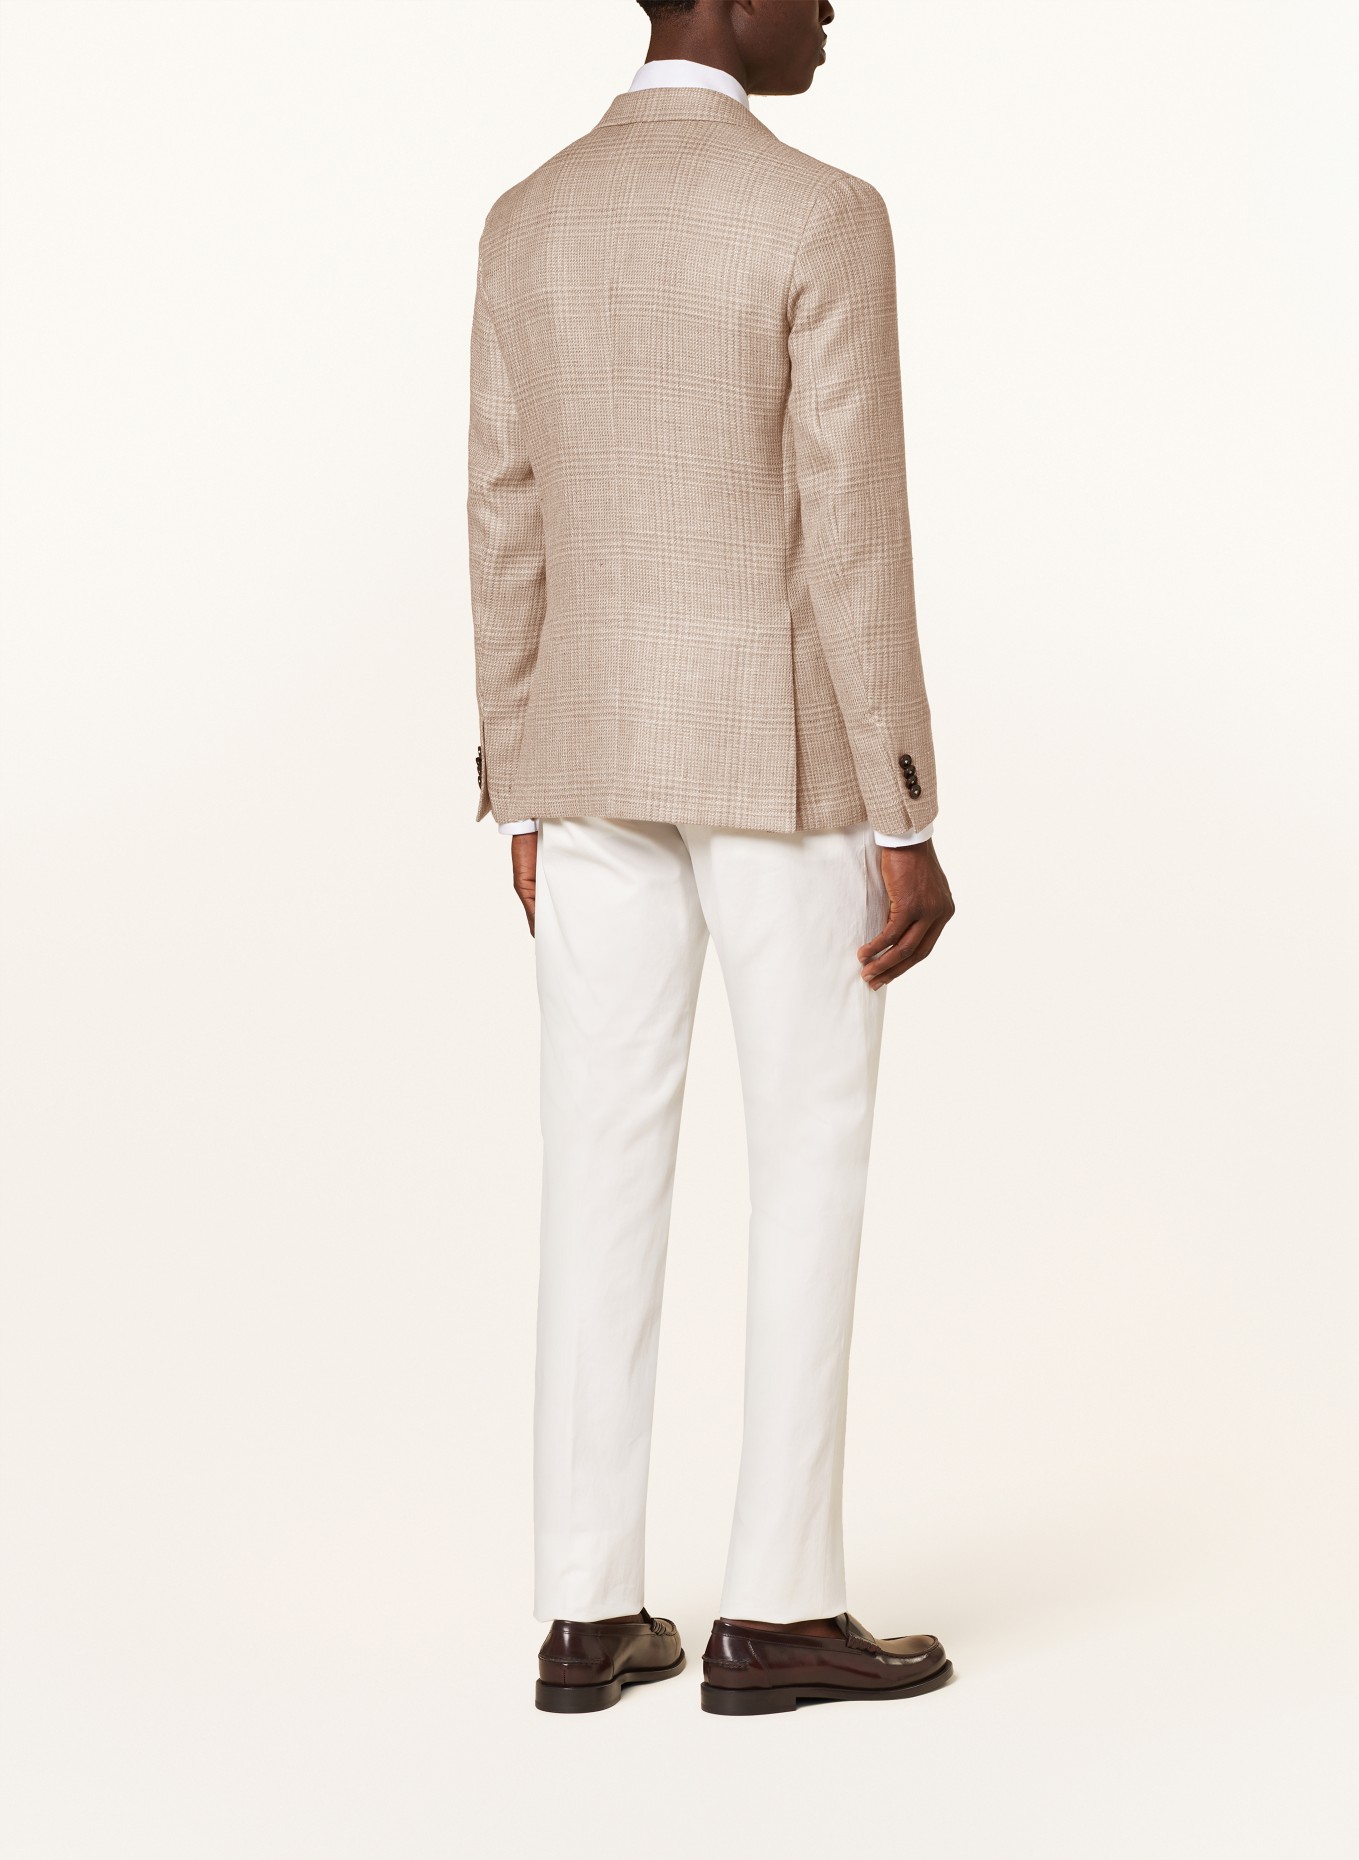 ZEGNA Tailored jacket extra slim fit with linen, Color: 7A7 Sand (Image 3)